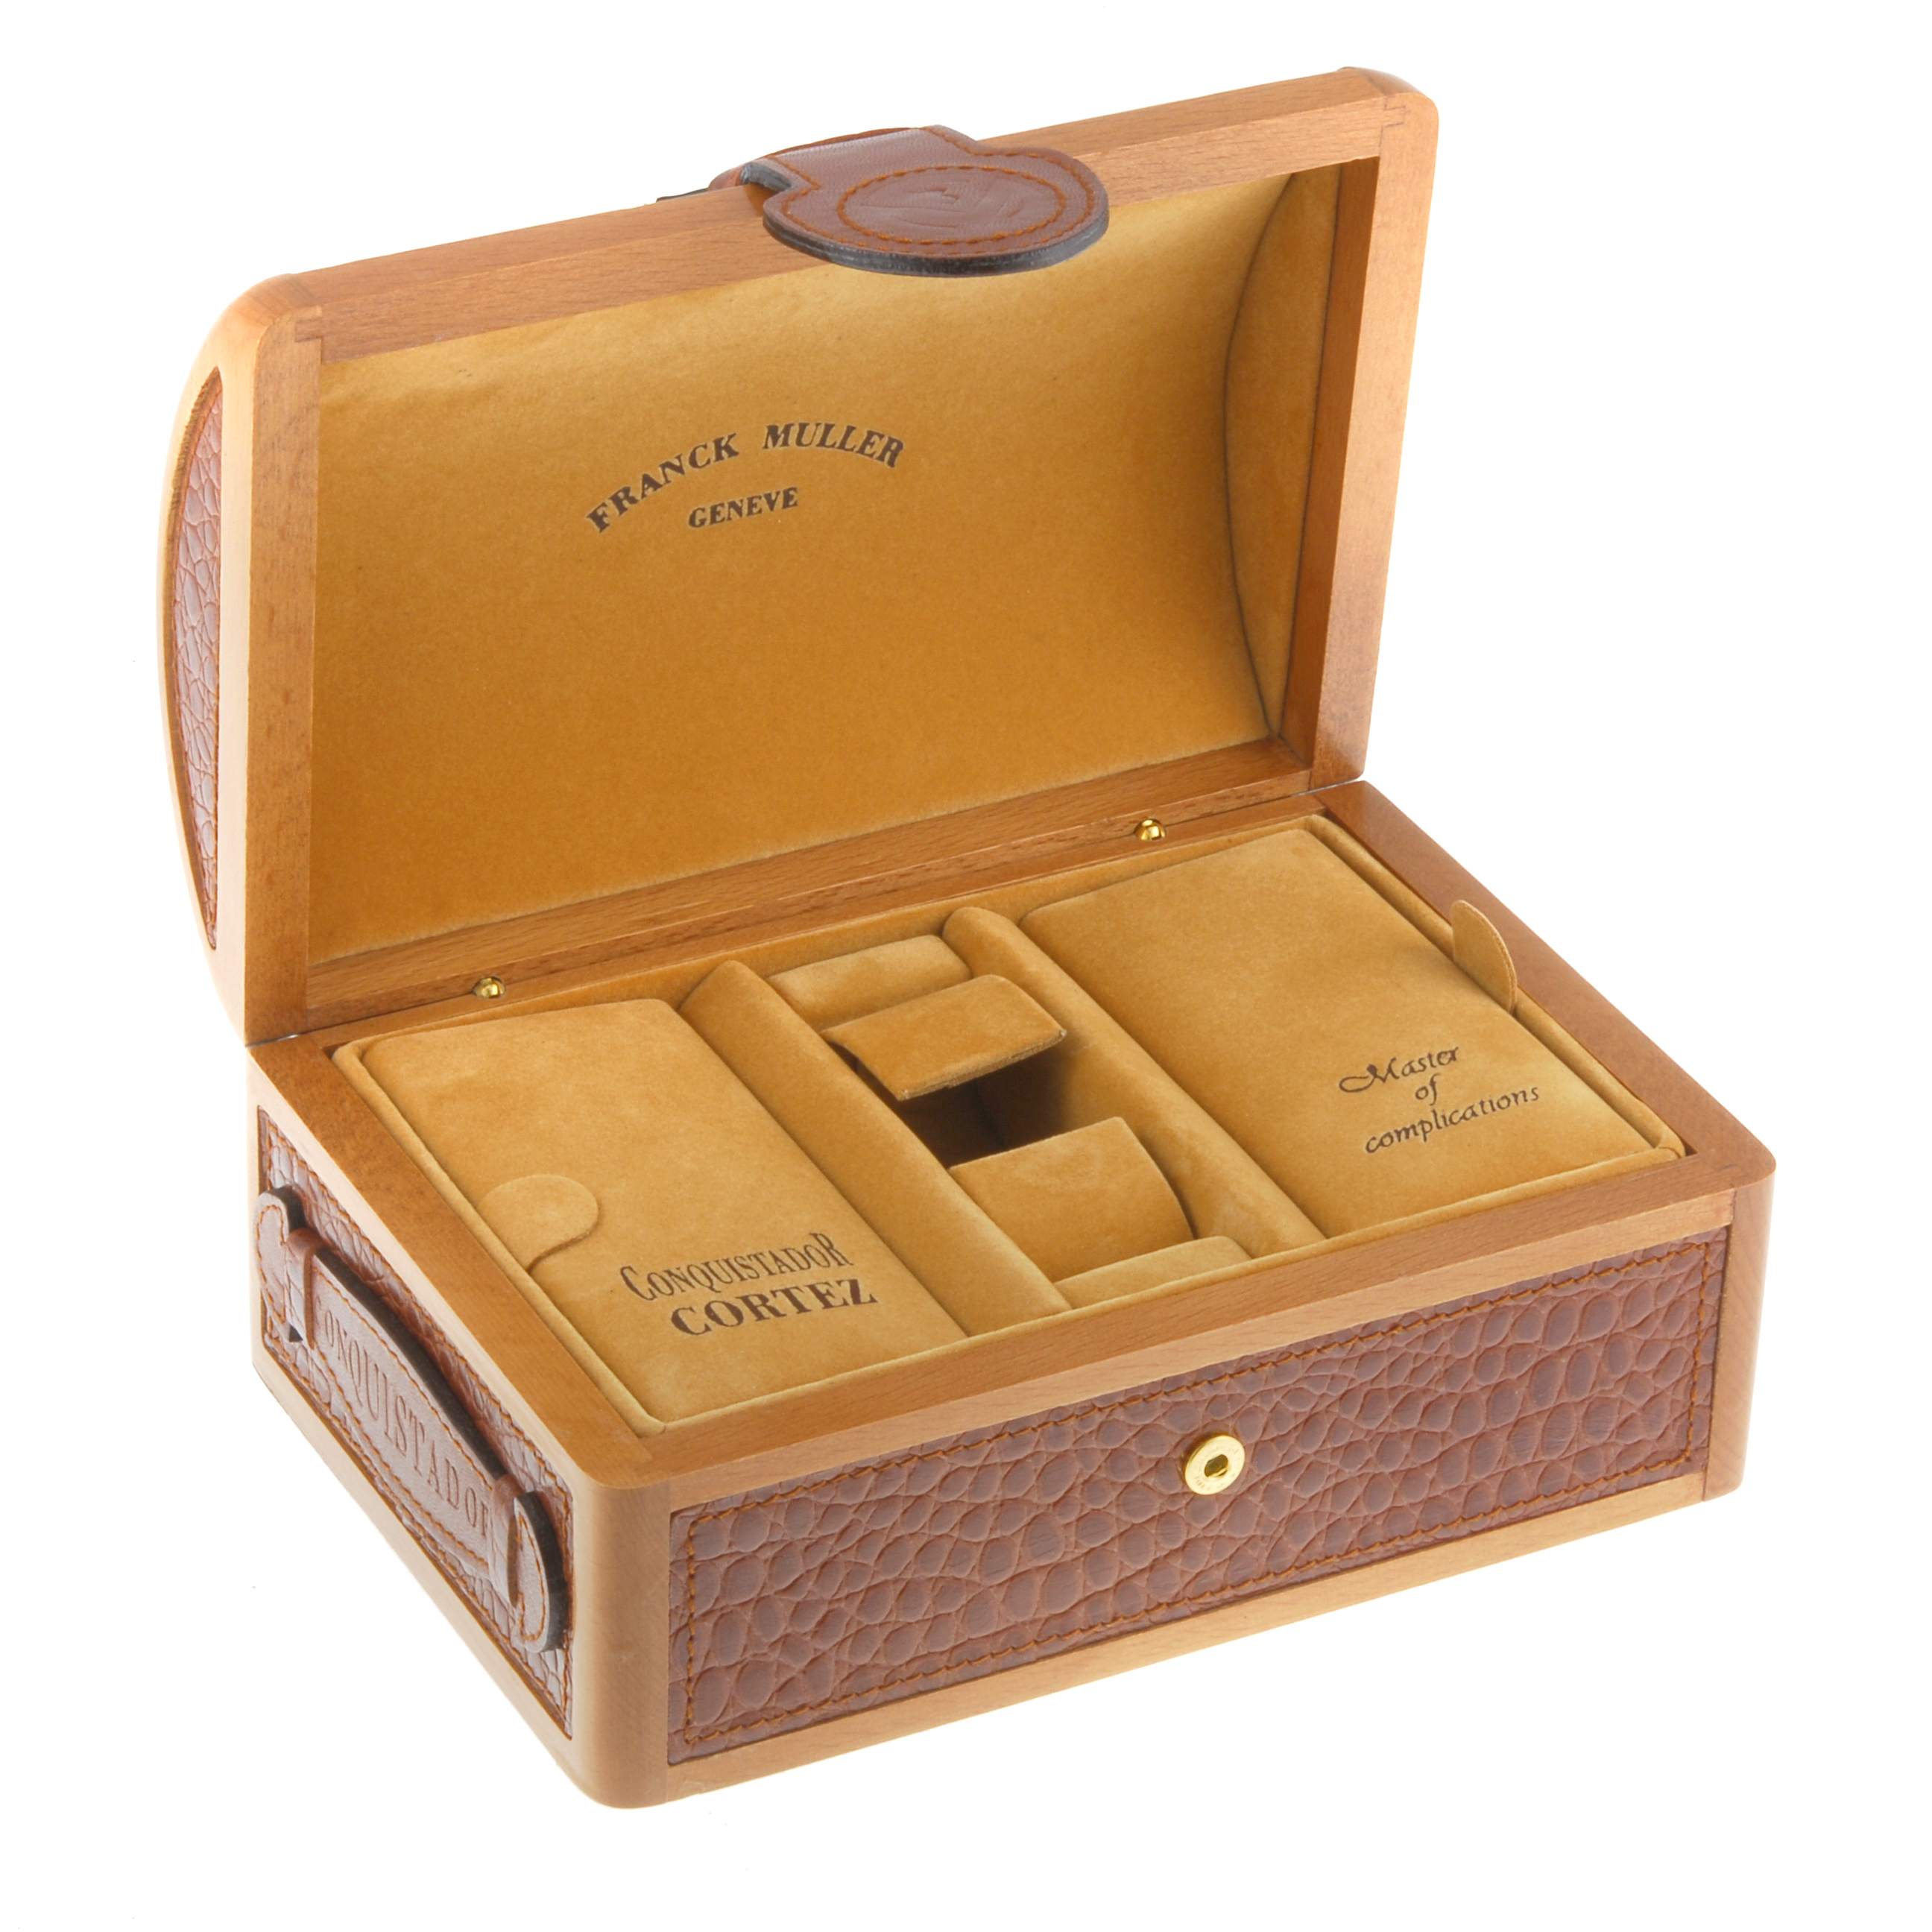 FRANCK MULLER - a complete watch box.    Box is in generally good condition with occasional light